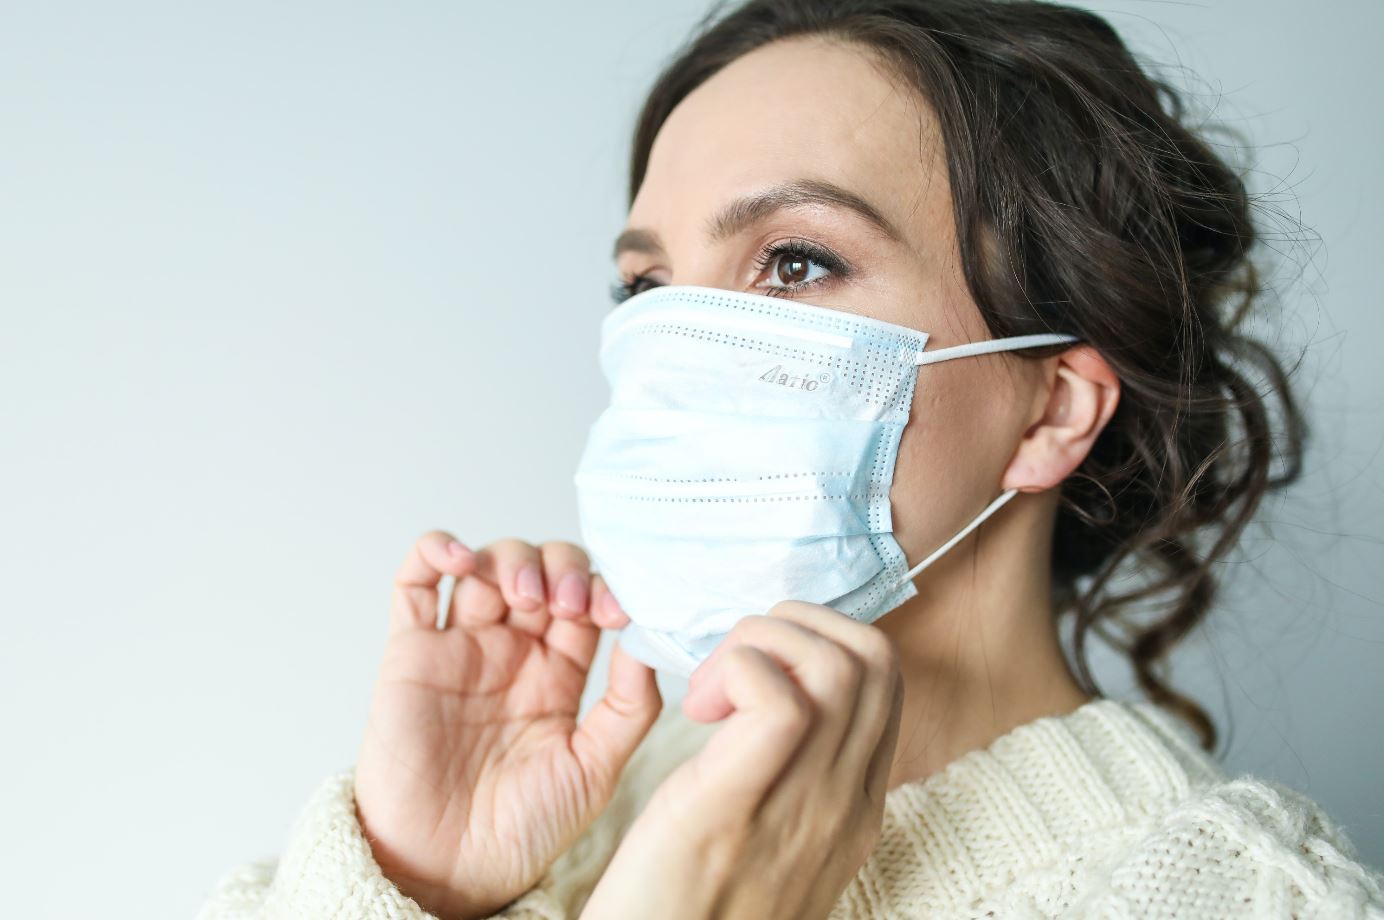 woman wearing a face mask: image source - pexels